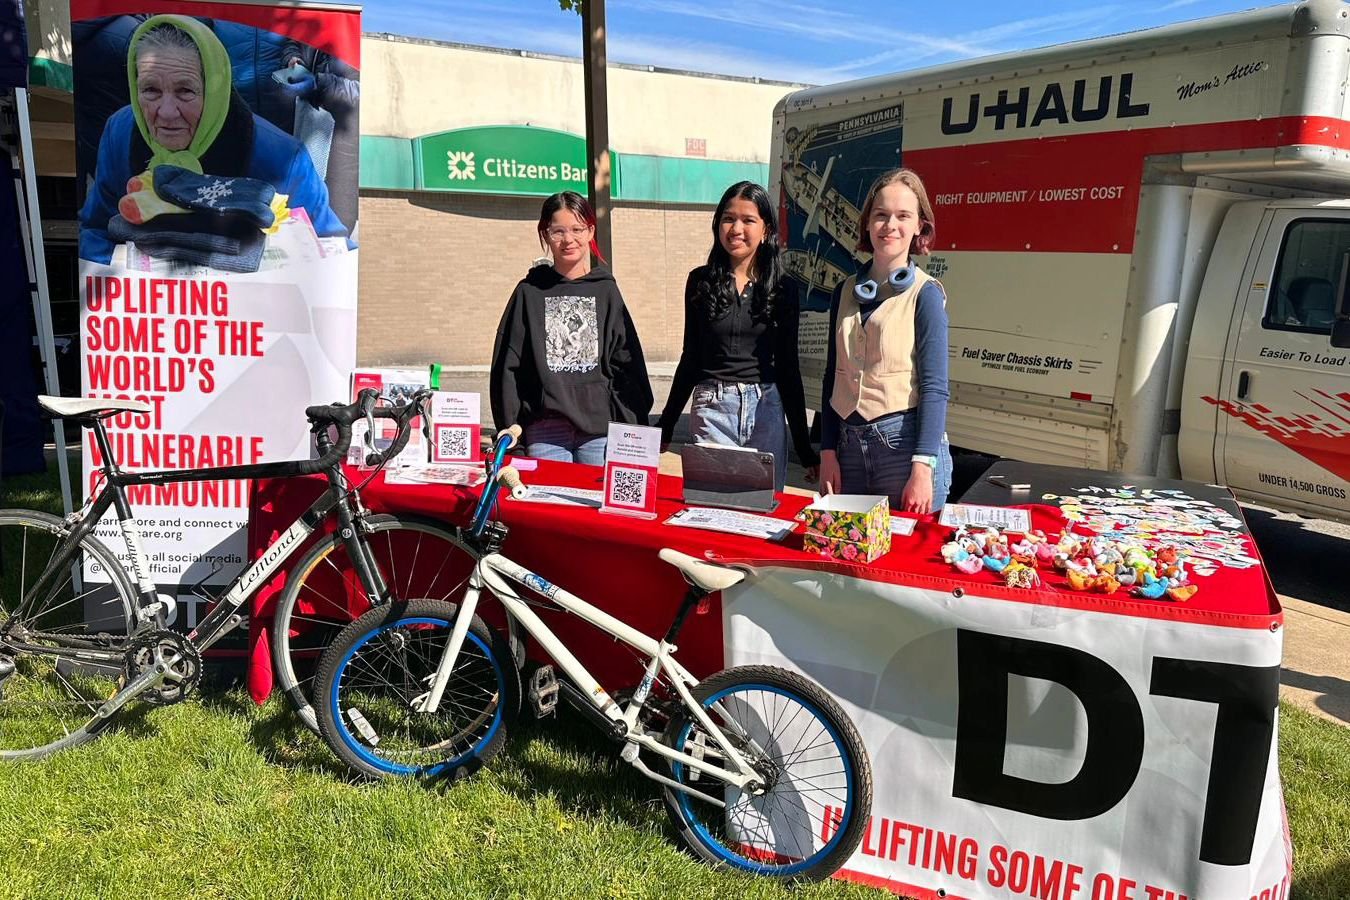 Our Bicycles for Ukraine Drive is happening now! ✨️🚲 Join DTCare and volunteers from Mt Lebanon Middle School Bike Club at Mt. Lebanon Uptown Market (on the Citizen's Bank lawn) this morning until 11 am to drop off your donation. 

Bicycles are a vi